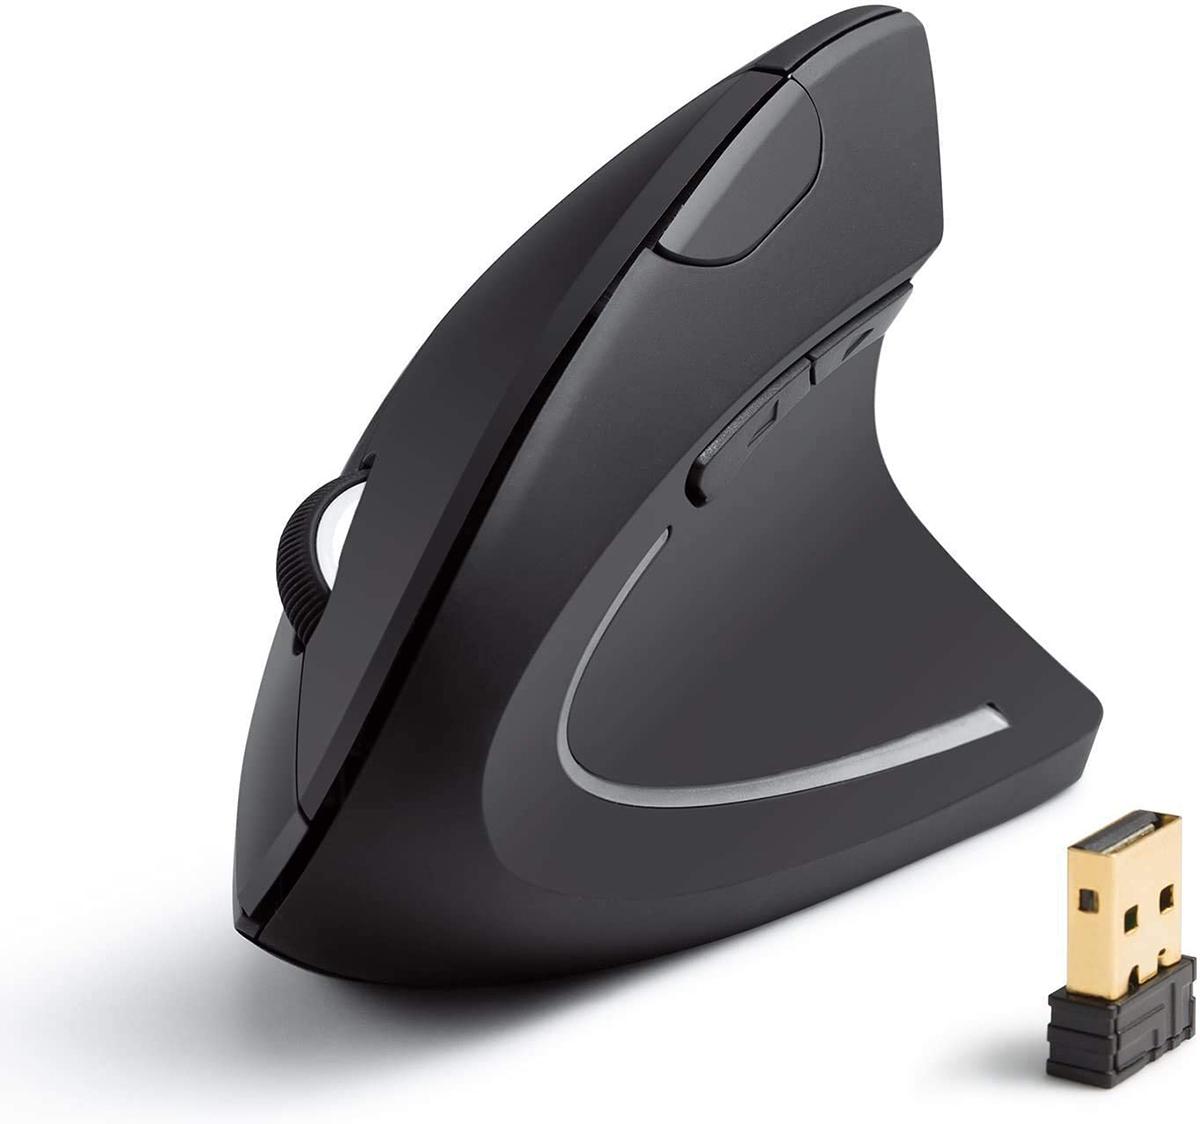 Anker Wireless Vertical Ergonomic Optical Mouse for $14.99